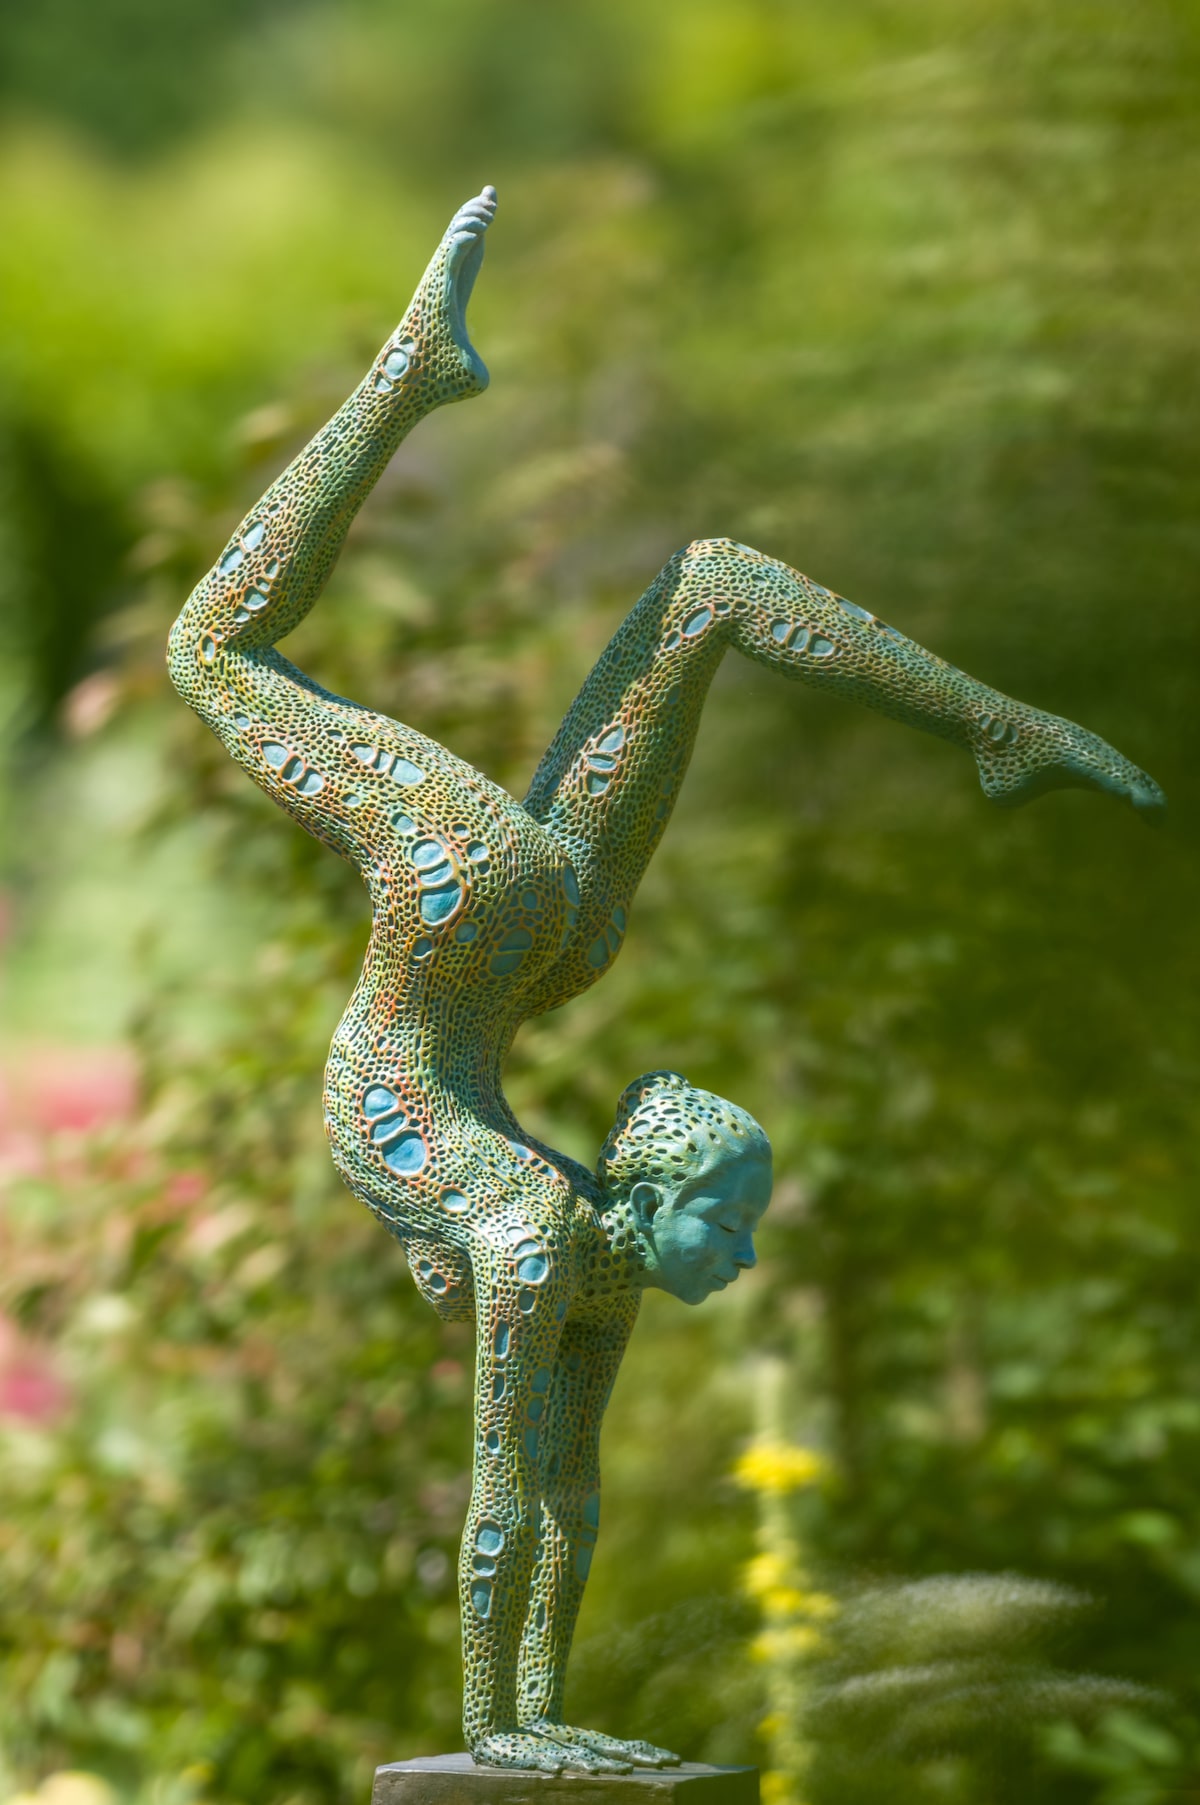 The Beauty Of Nature Fused With Elegant Human Movements In Lyrical Sculptures By Jonathan Hateley (6)